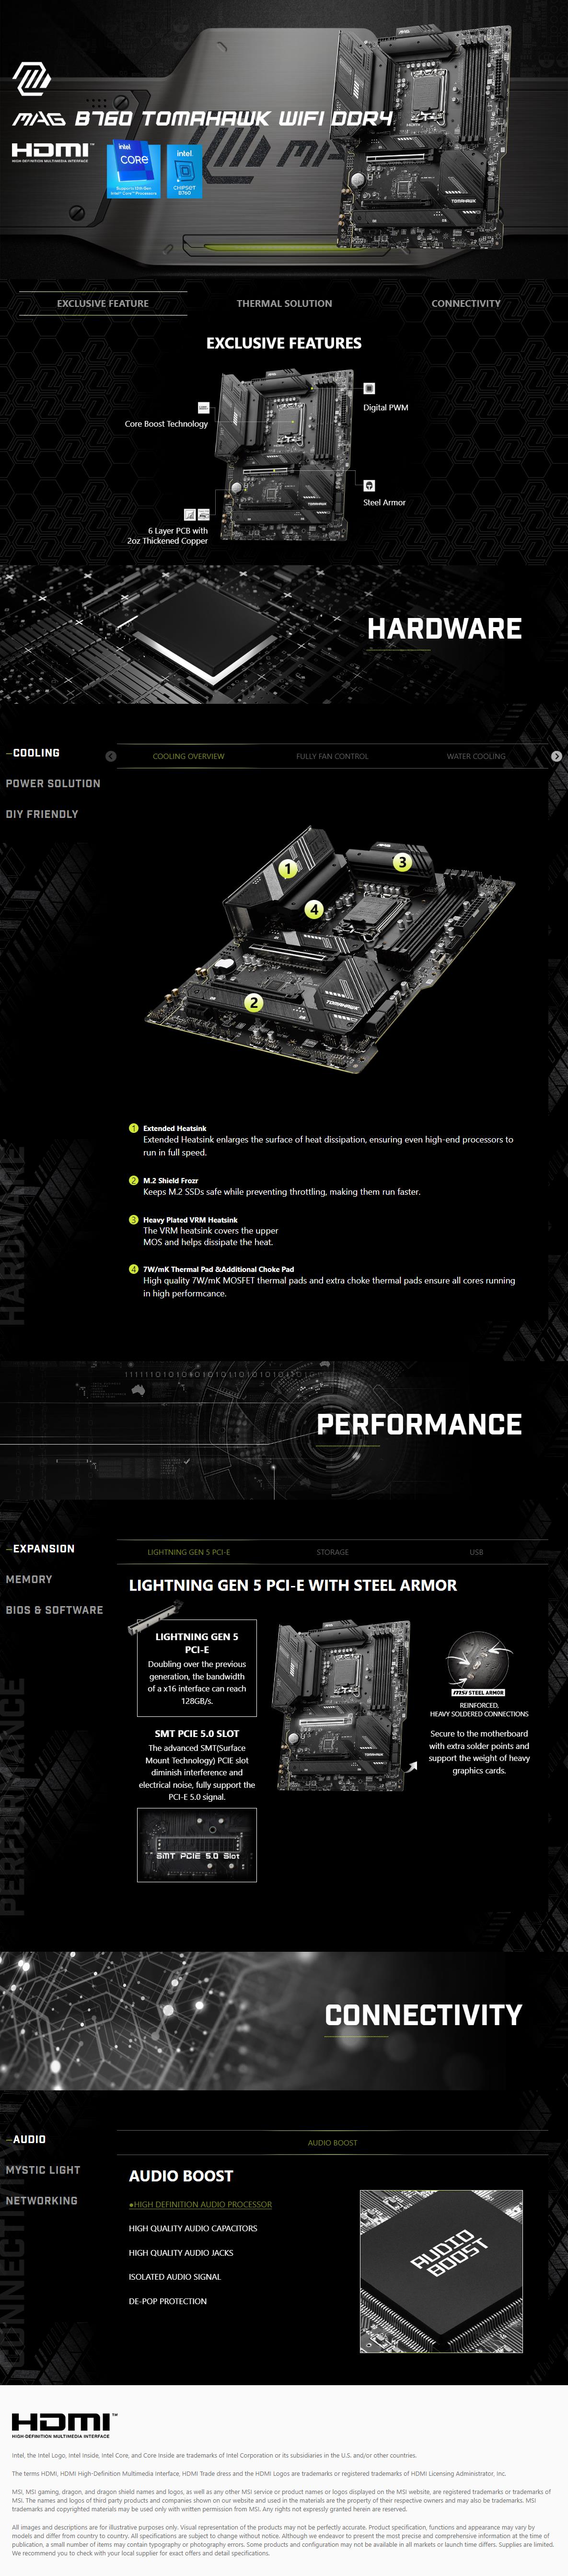 A large marketing image providing additional information about the product MSI MAG B760 Tomahawk WiFi LGA1700 ATX Desktop Motherboard - Additional alt info not provided